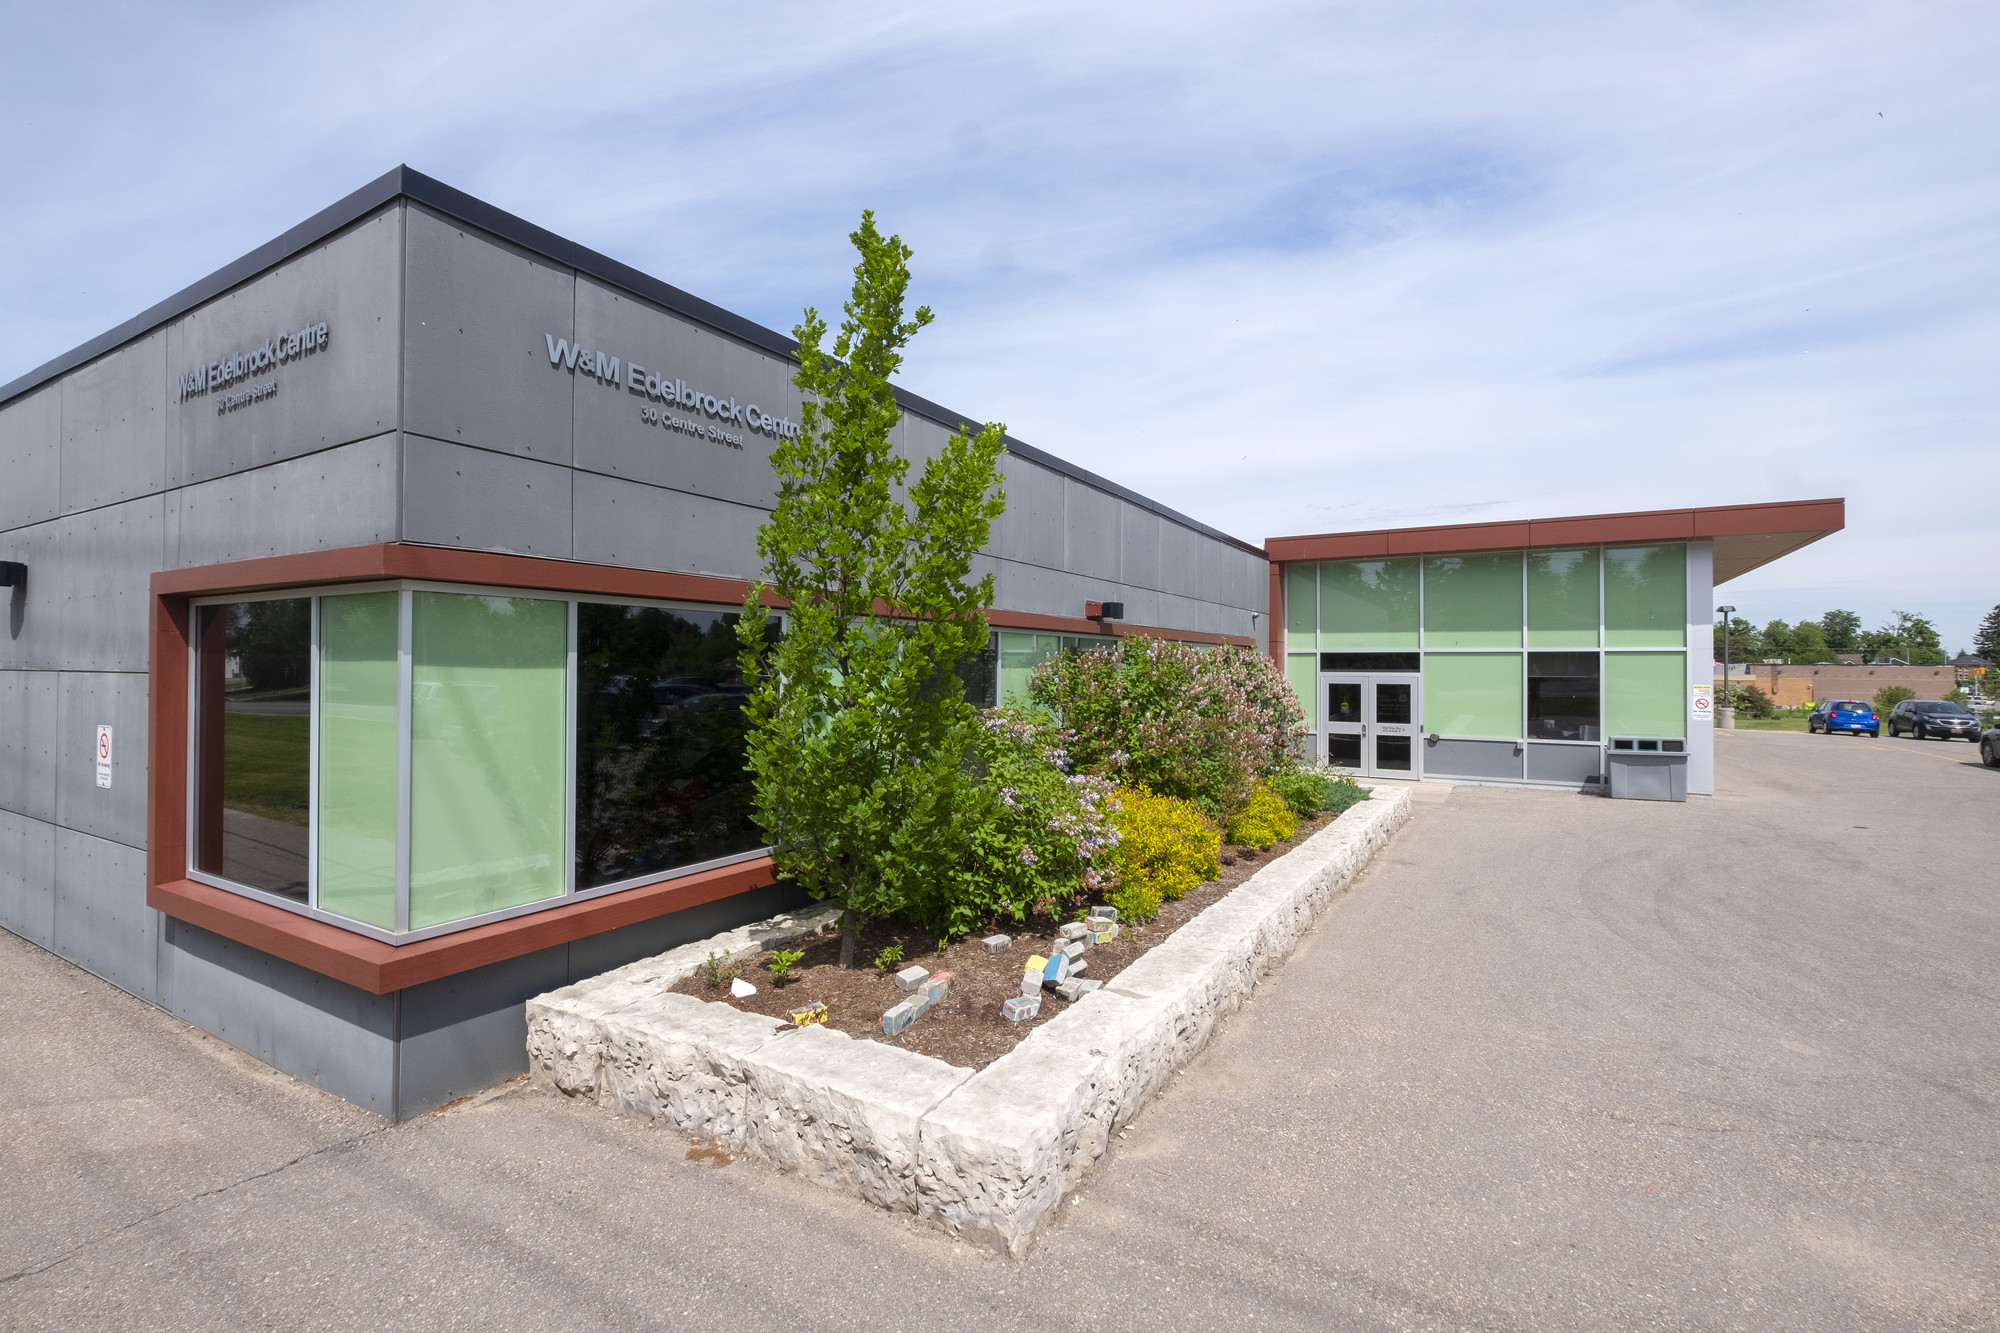 Orangeville Campus building from the outside